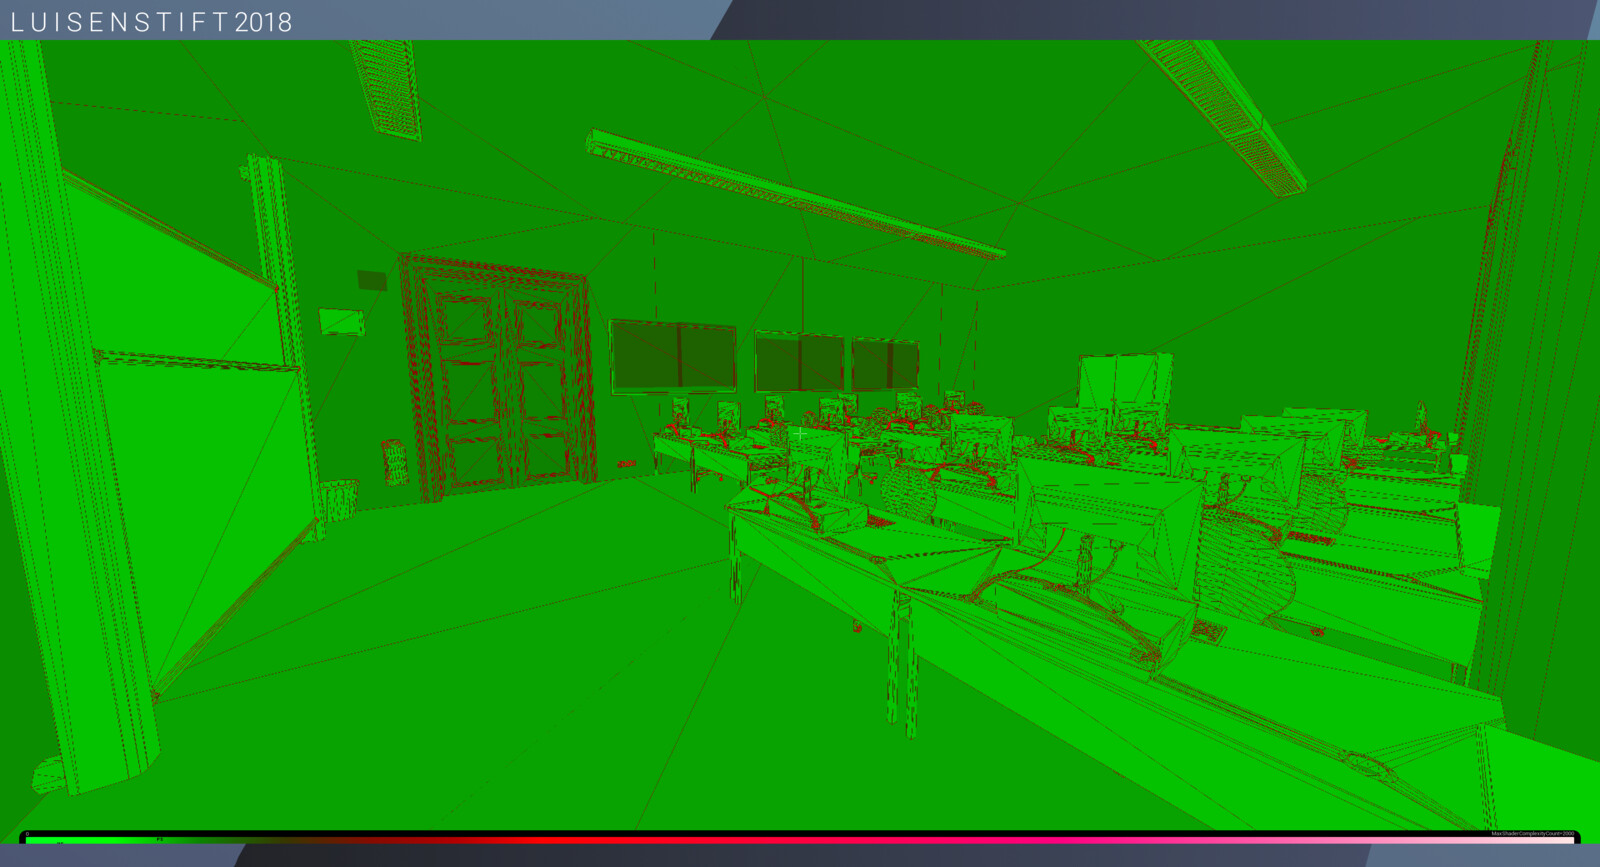 This view mode shows the shader complexity + quad overdraw of one of the rooms.